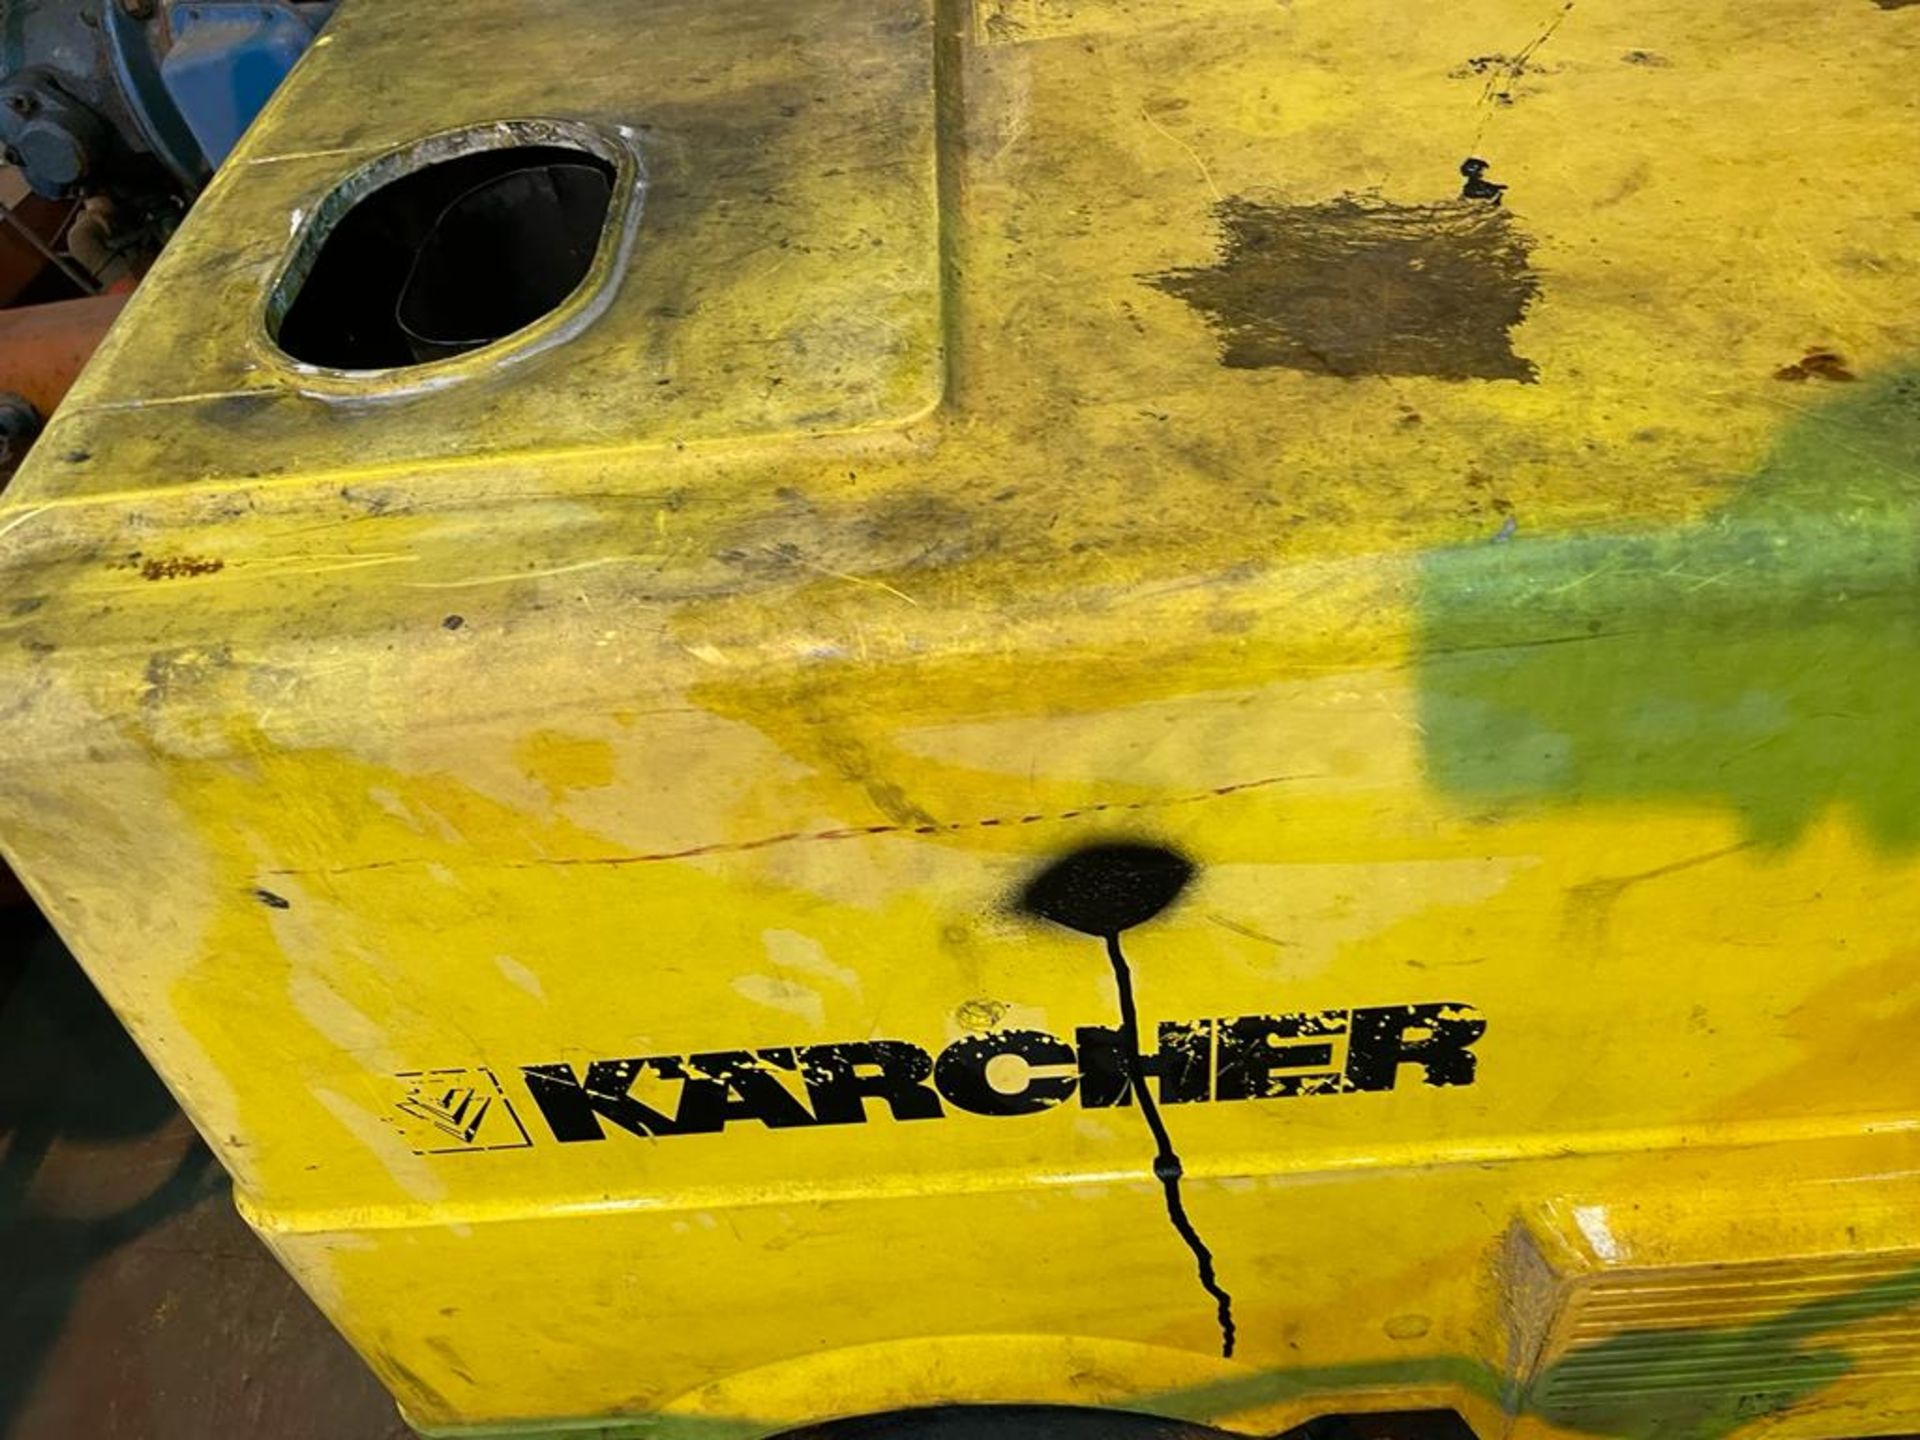 Karcher pressure washer we have plugged in turns on but we have not tested water through it - Image 2 of 5